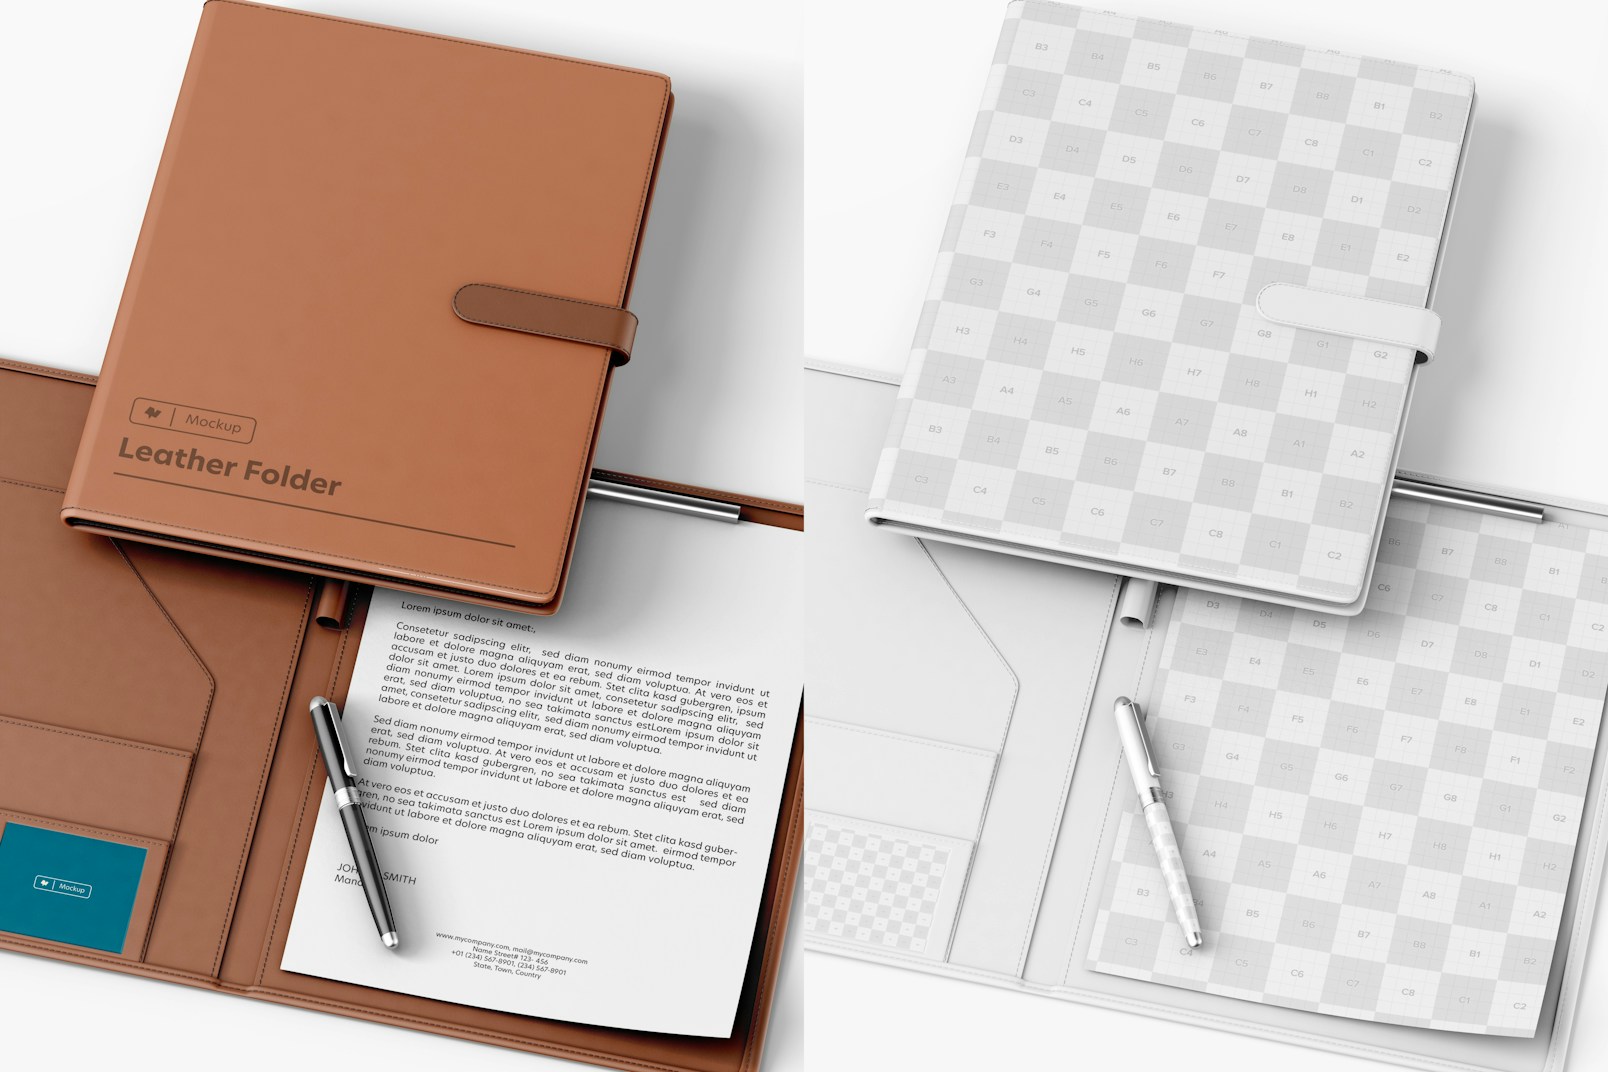 Leather Folder with Tab Mockup, Stacked